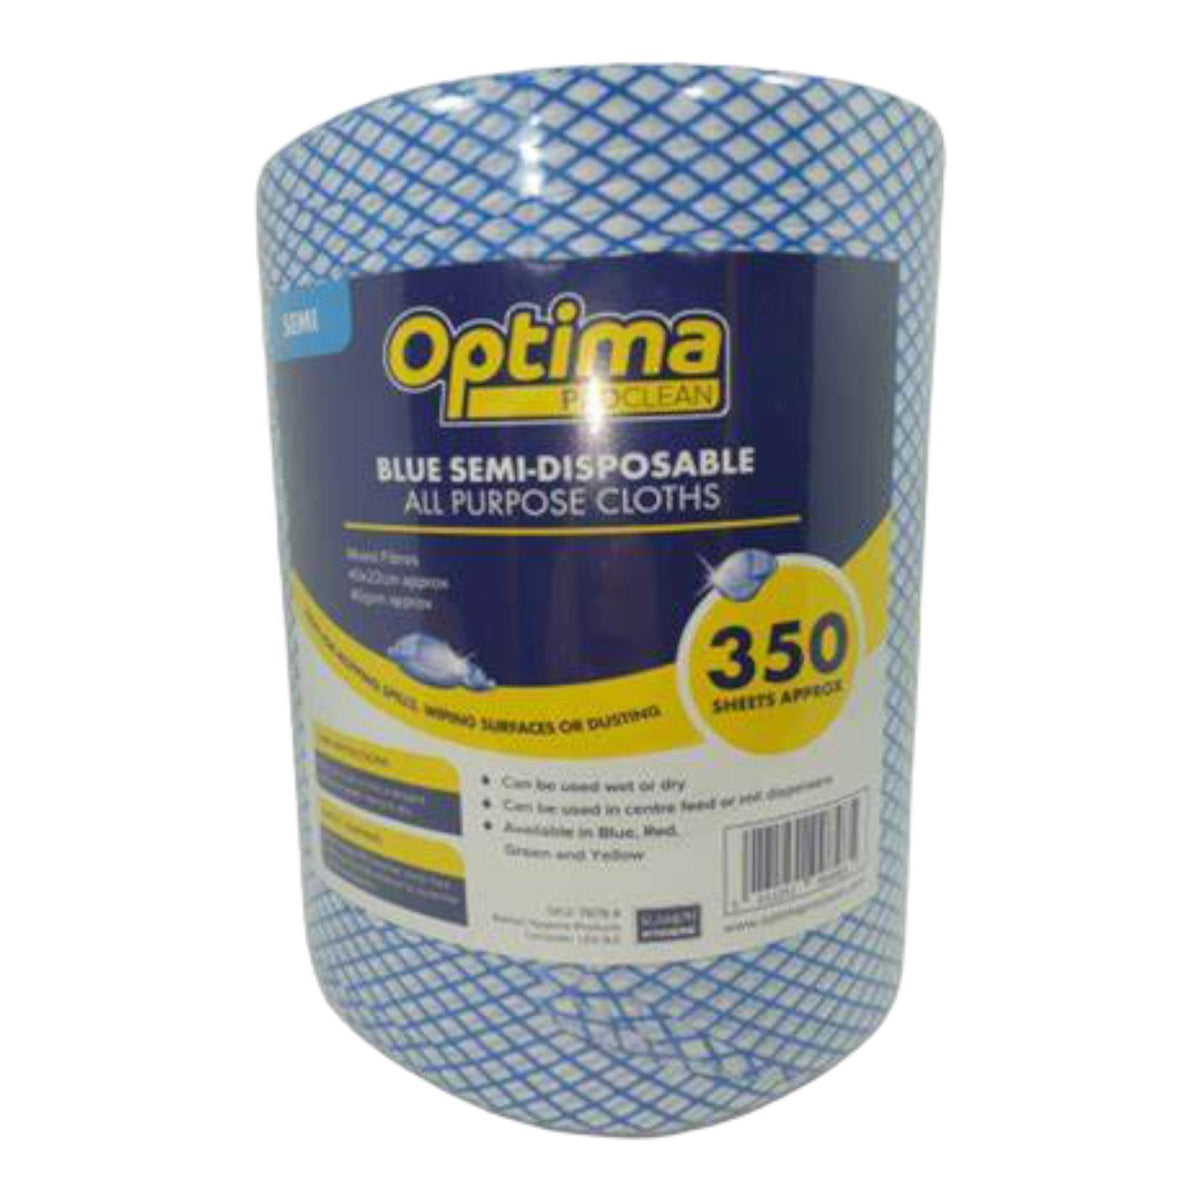 Optima Proclean Lightweight All Purpose Cleaning Cloths 350 Blue